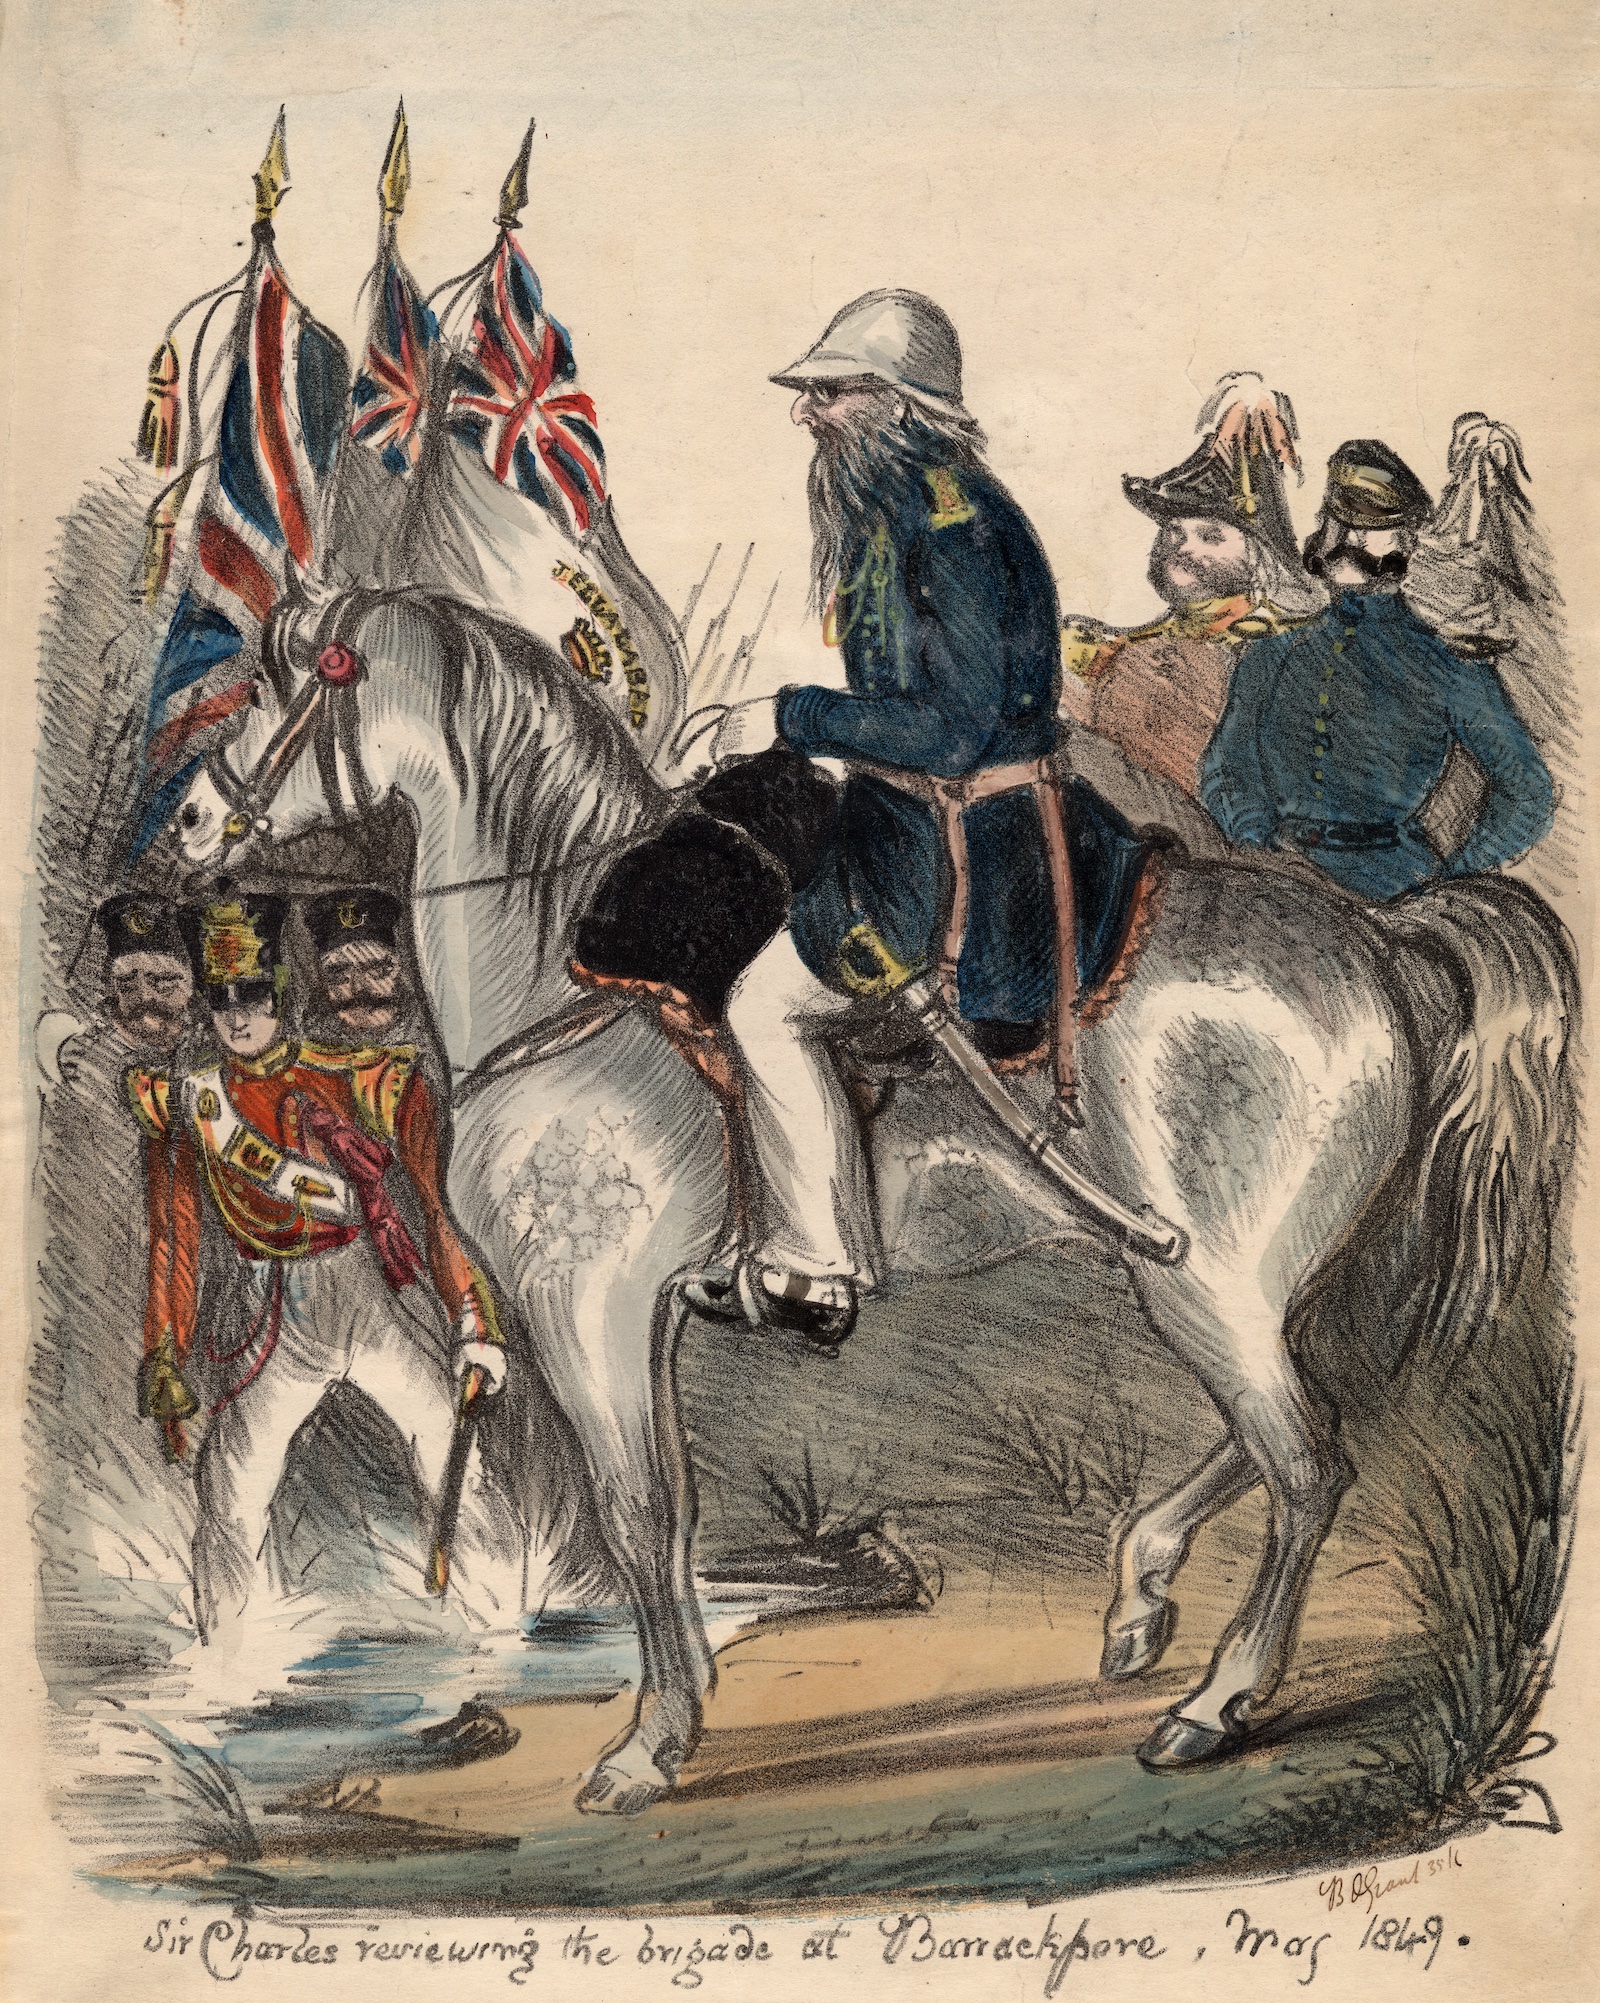 olor lithograph showing Sir Charles reviewing the brigade at Barrackpore, May 1849.